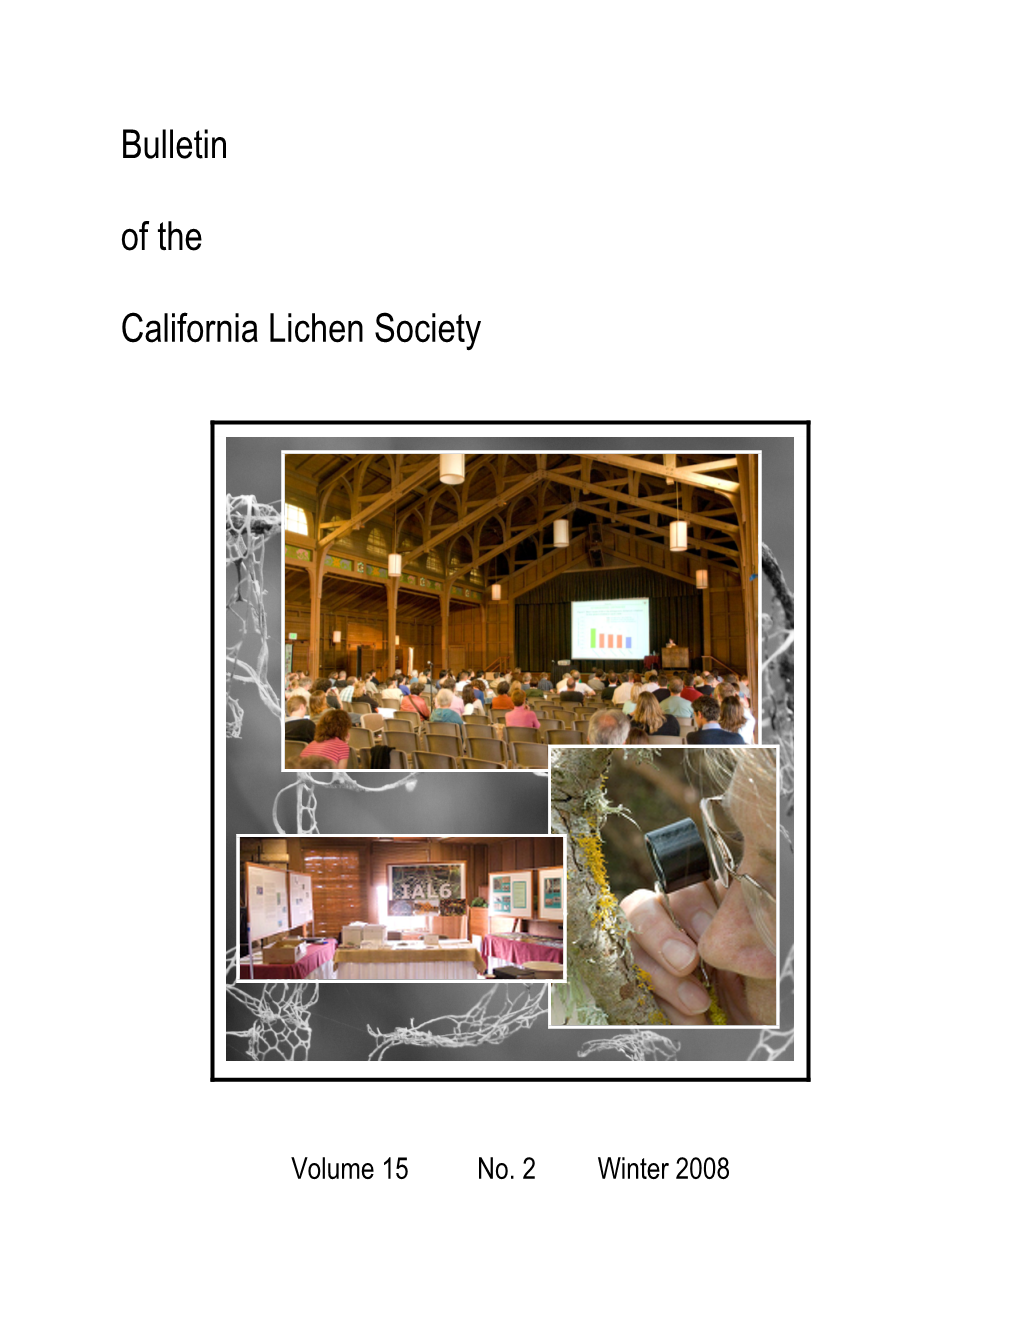 Winter 2008 the California Lichen Society Seeks to Promote the Appreciation, Conservation and Study of Lichens